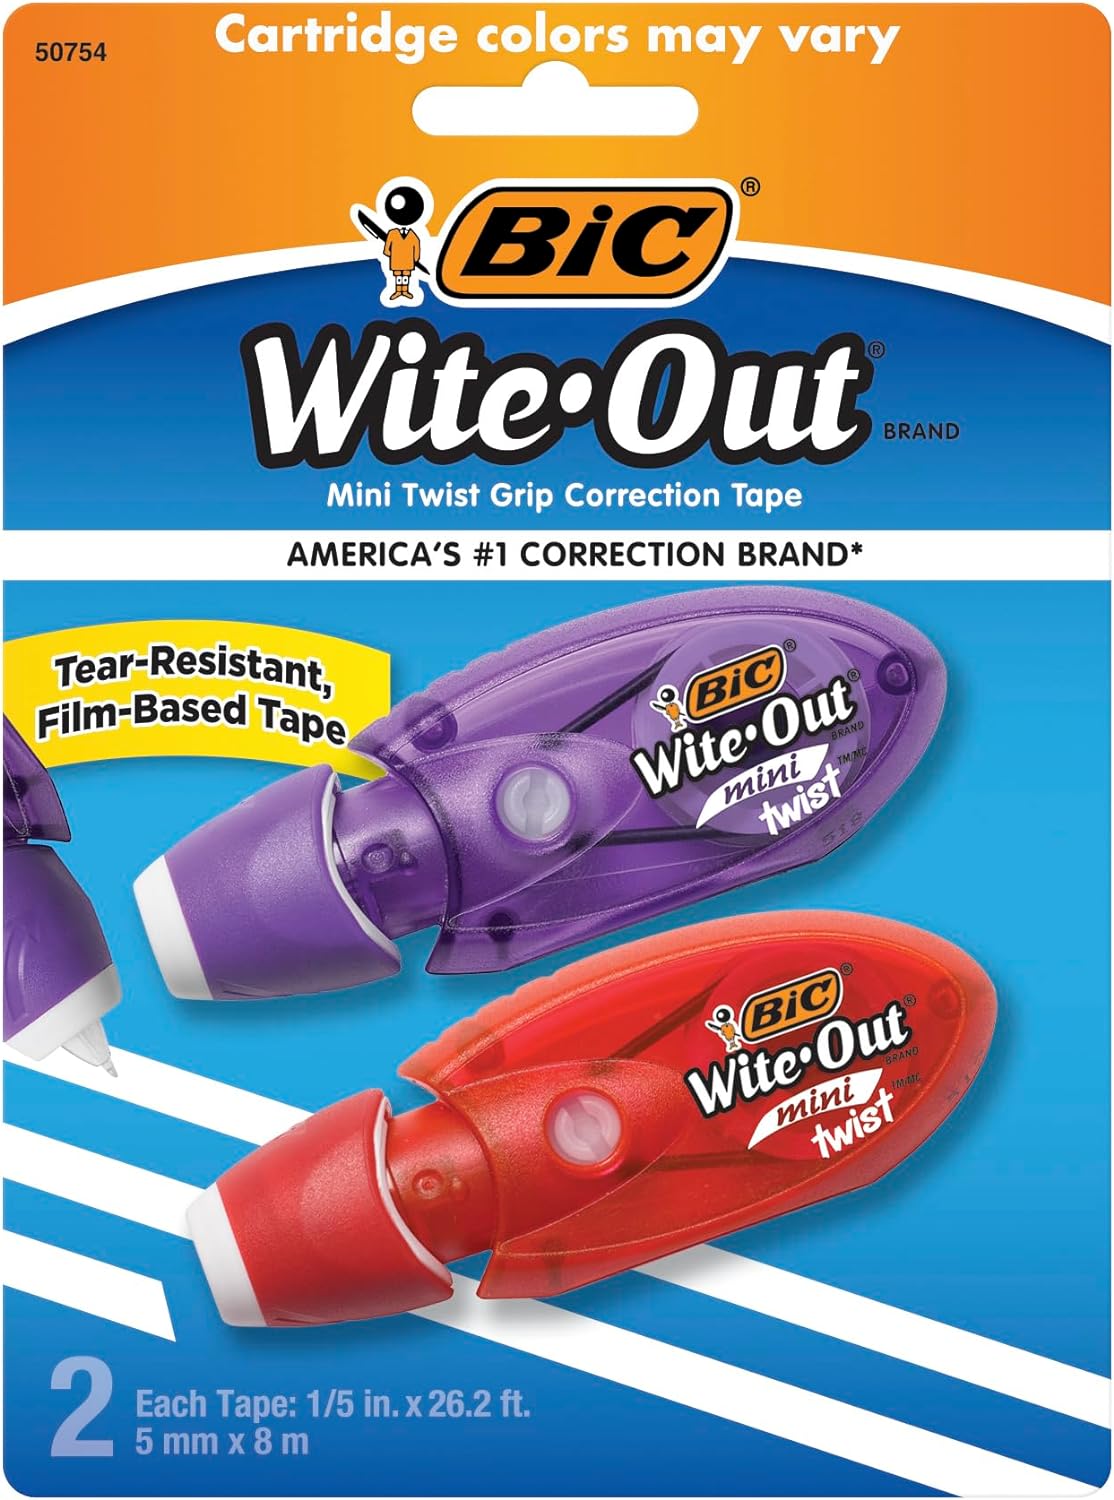 BIC Wite-Out Mini Twist Correction Tape, White, Tear-resistant, Compact and Film-Based Tape, 2-Count Pack (WOMTP21-WHI) (Packaging May Vary)